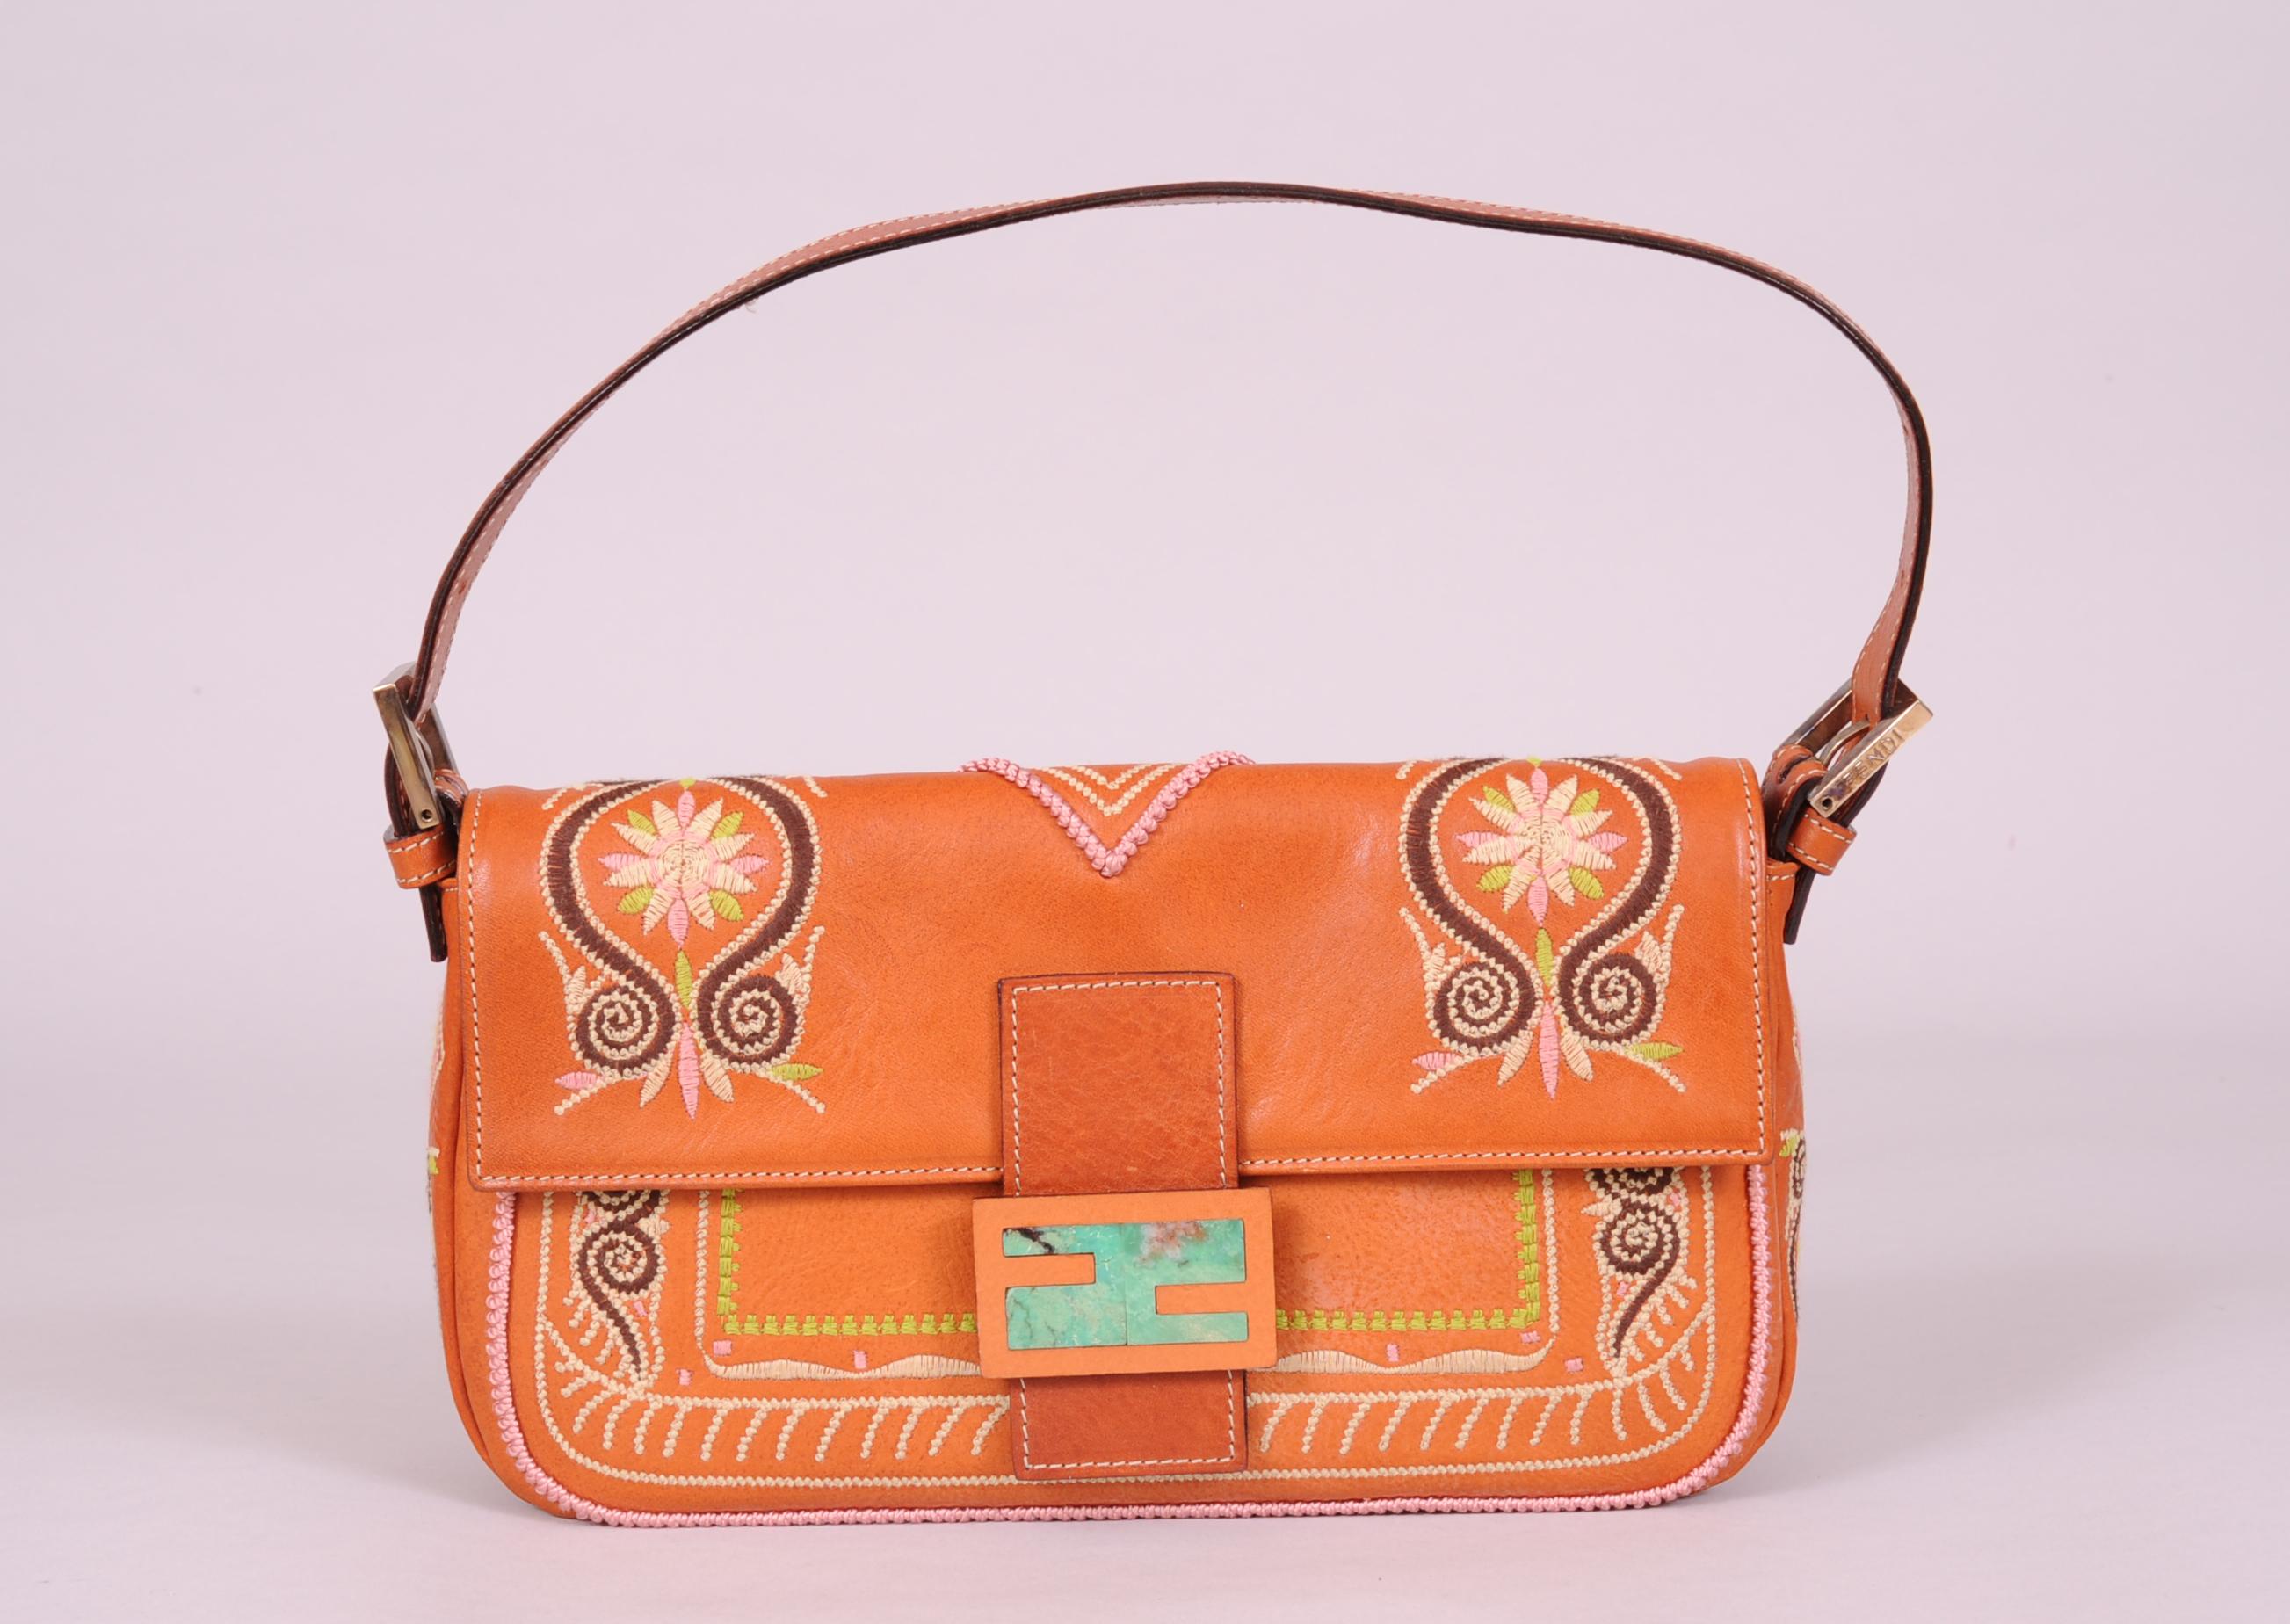 Fendi baguettes come in so many variations but this embroidered leather bag caught my eye. Bringing a touch of Hippie Chic  to this bag, the embroidery is both floral and geometric in pale pink, green and cream as well as chocolate brown. The clasp